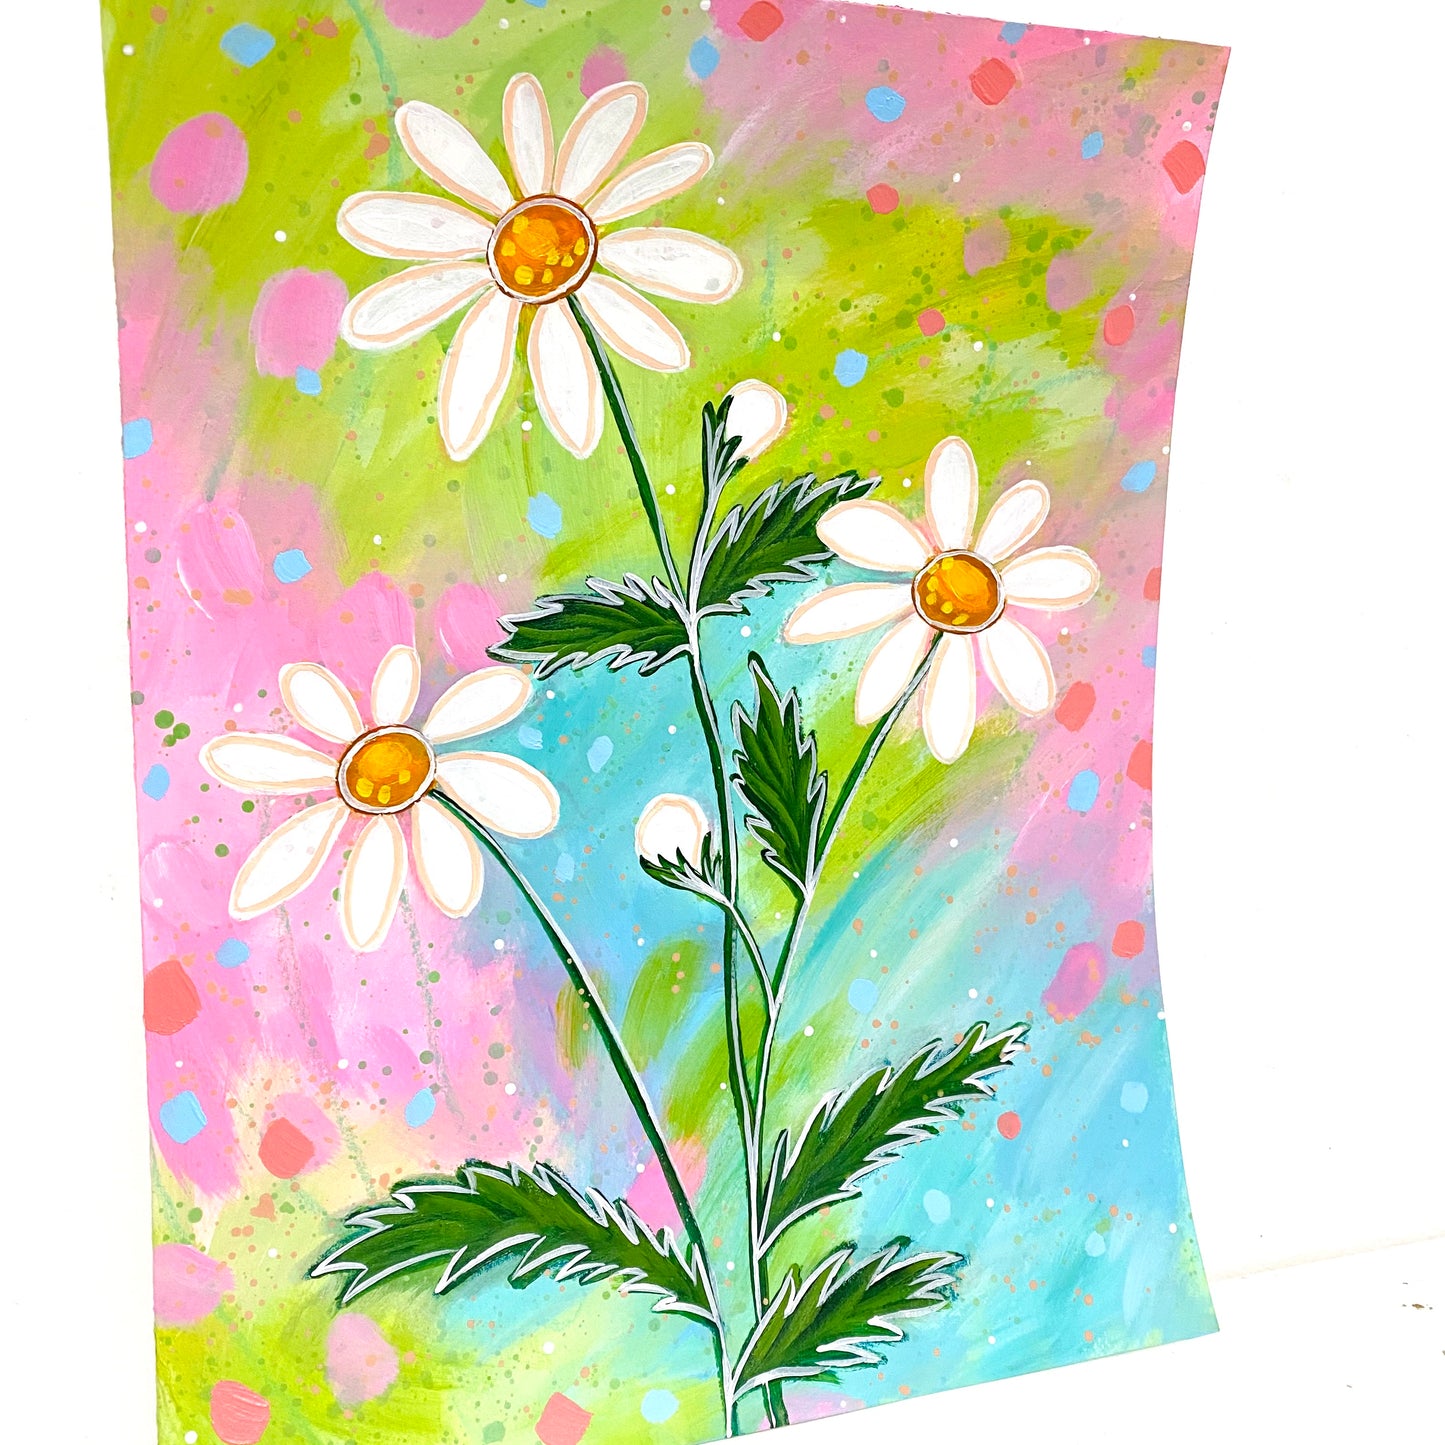 February Flowers Day 12 Daisy 8.5x11 inch original painting